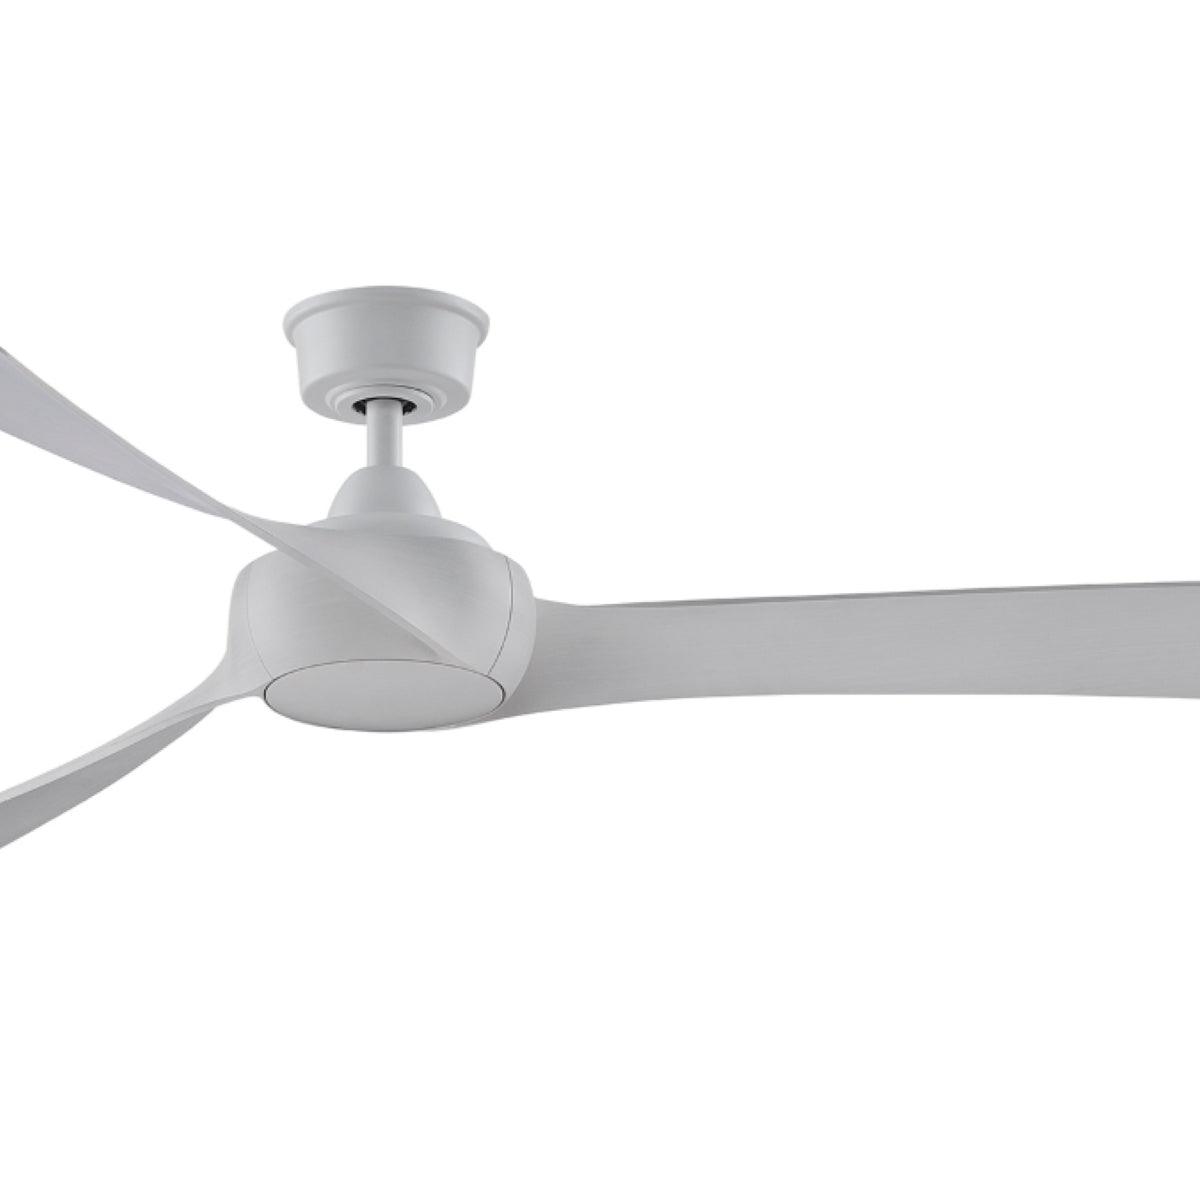 Wrap Custom Indoor/Outdoor Ceiling Fan Motor With Remote, Matte White Finish, 44-60" Blades Sold Separately - Bees Lighting